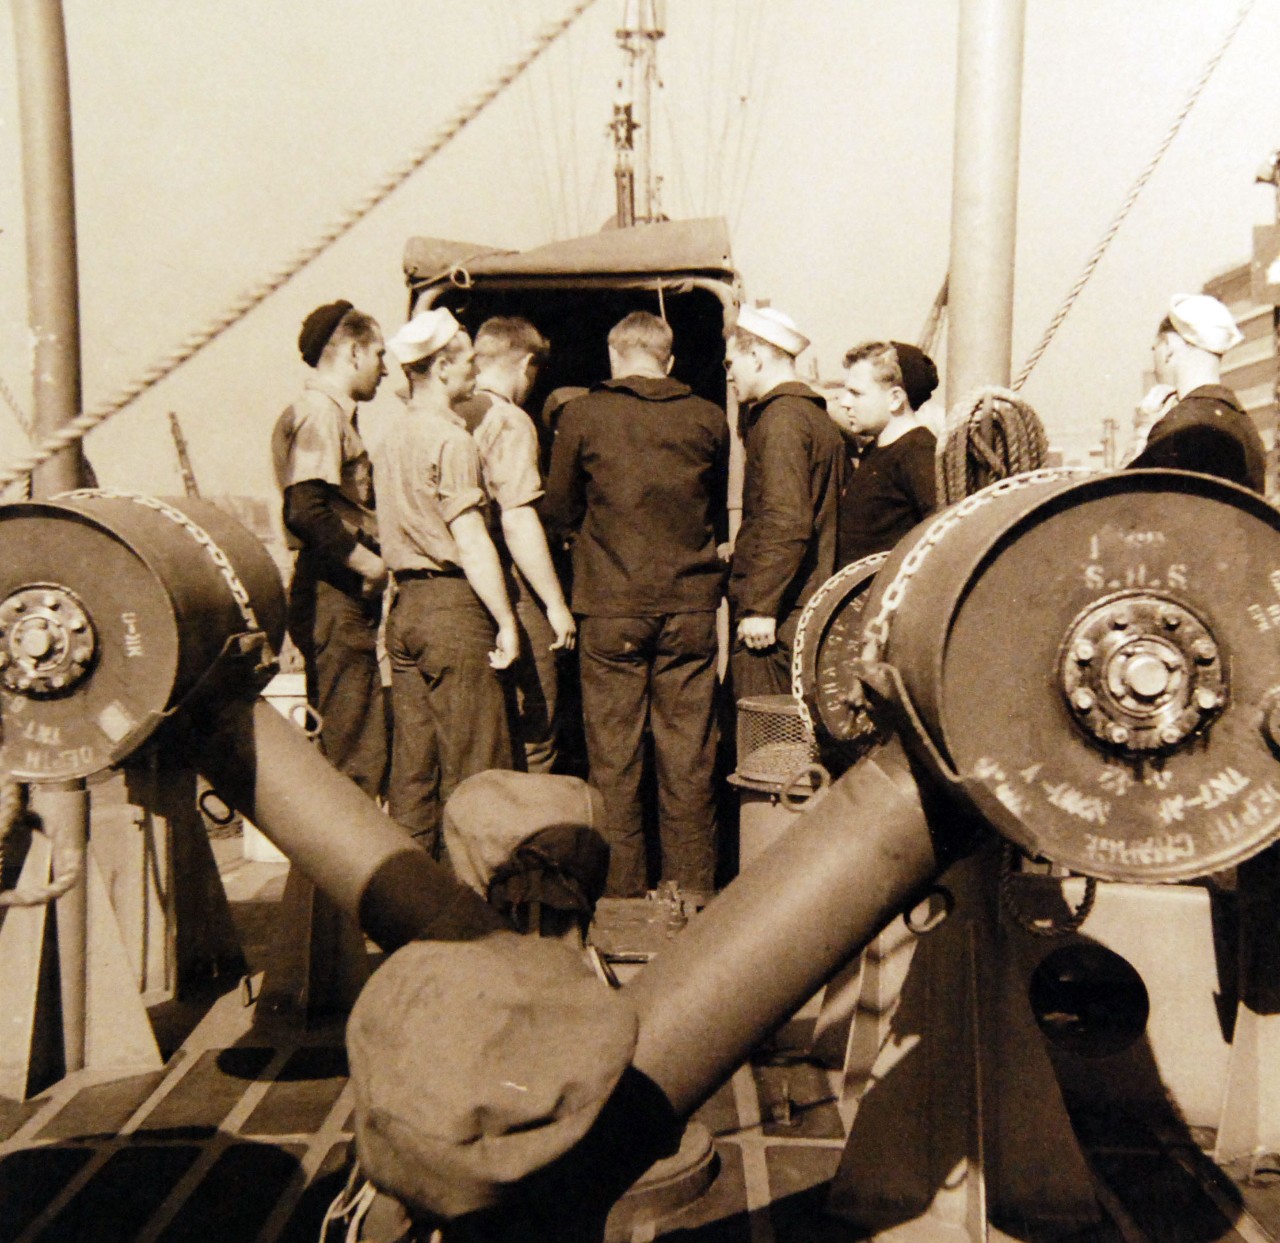 <p>80-G-14954: Battle of the Atlantic: Weapons: K-Gun. Navigating USS PC-556. Depth charges onboard. K-guns propel depth charges to either side of ship. The “ash can” weighs 465 pounds and holds 300 pounds of TNT, October 8, 1942.&nbsp;</p>
